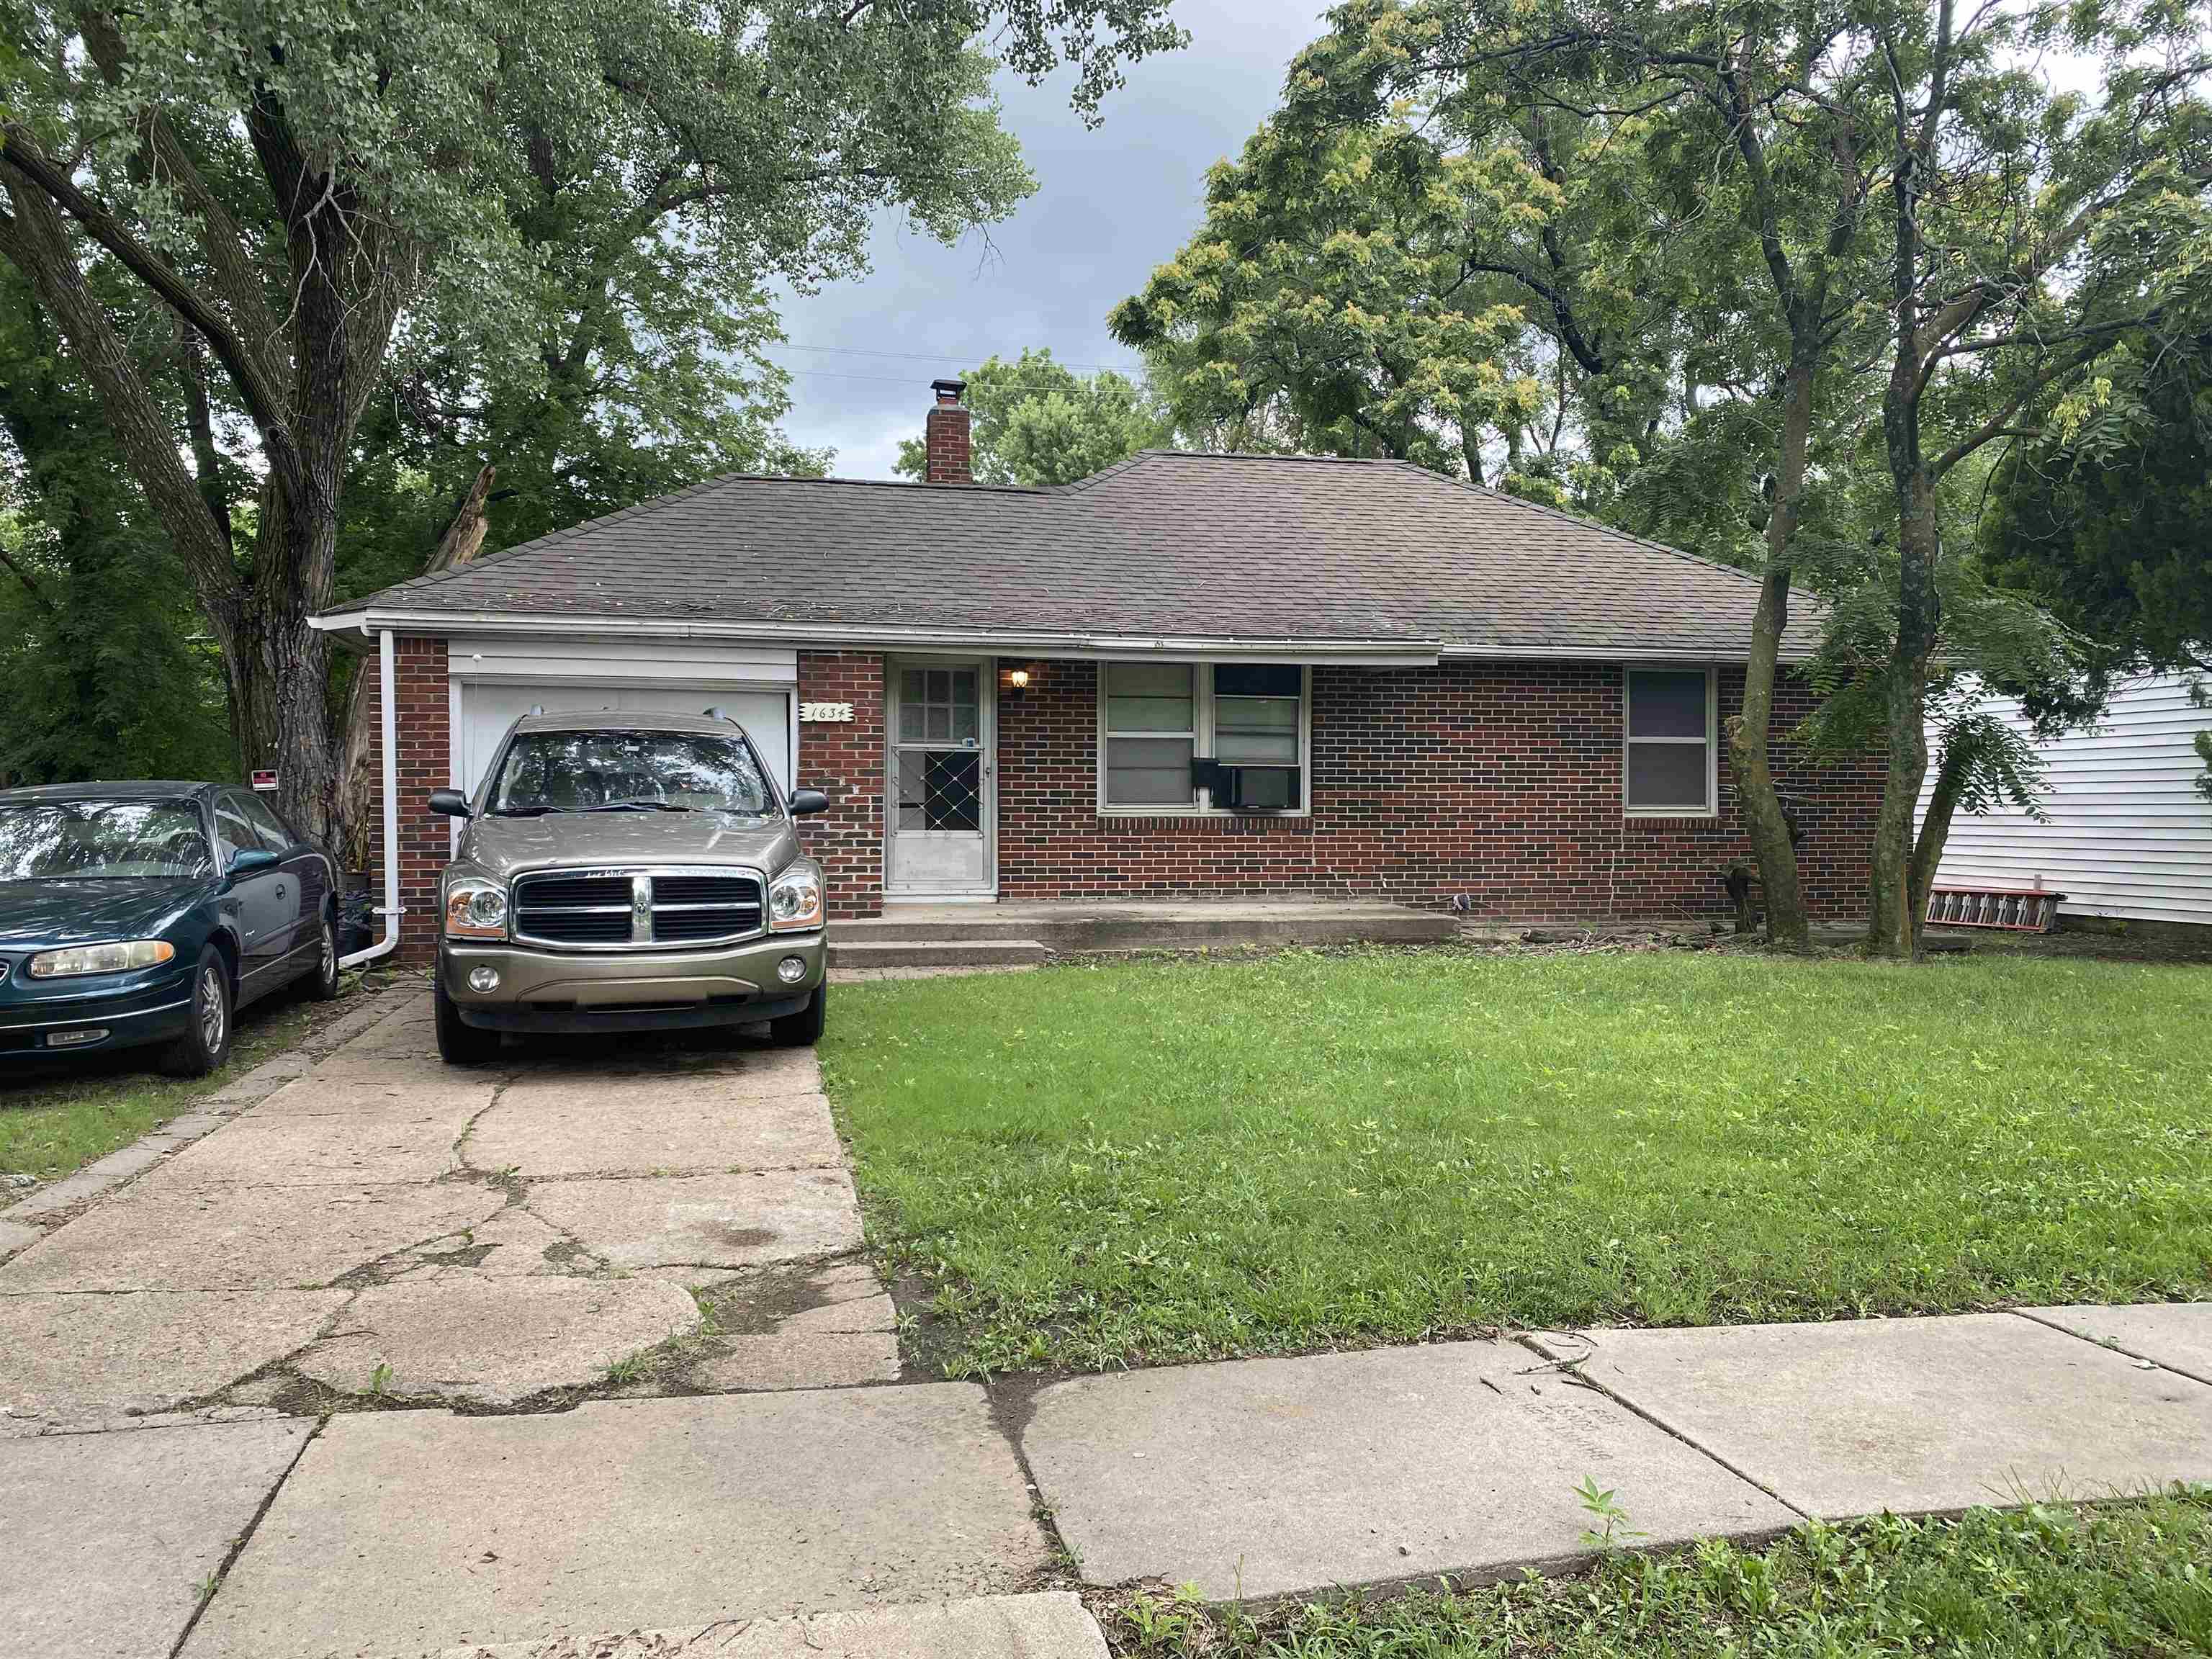 Very nice 2 bedroom home with unfinished basement on large corner lot. Kitchen and bathroom have bot